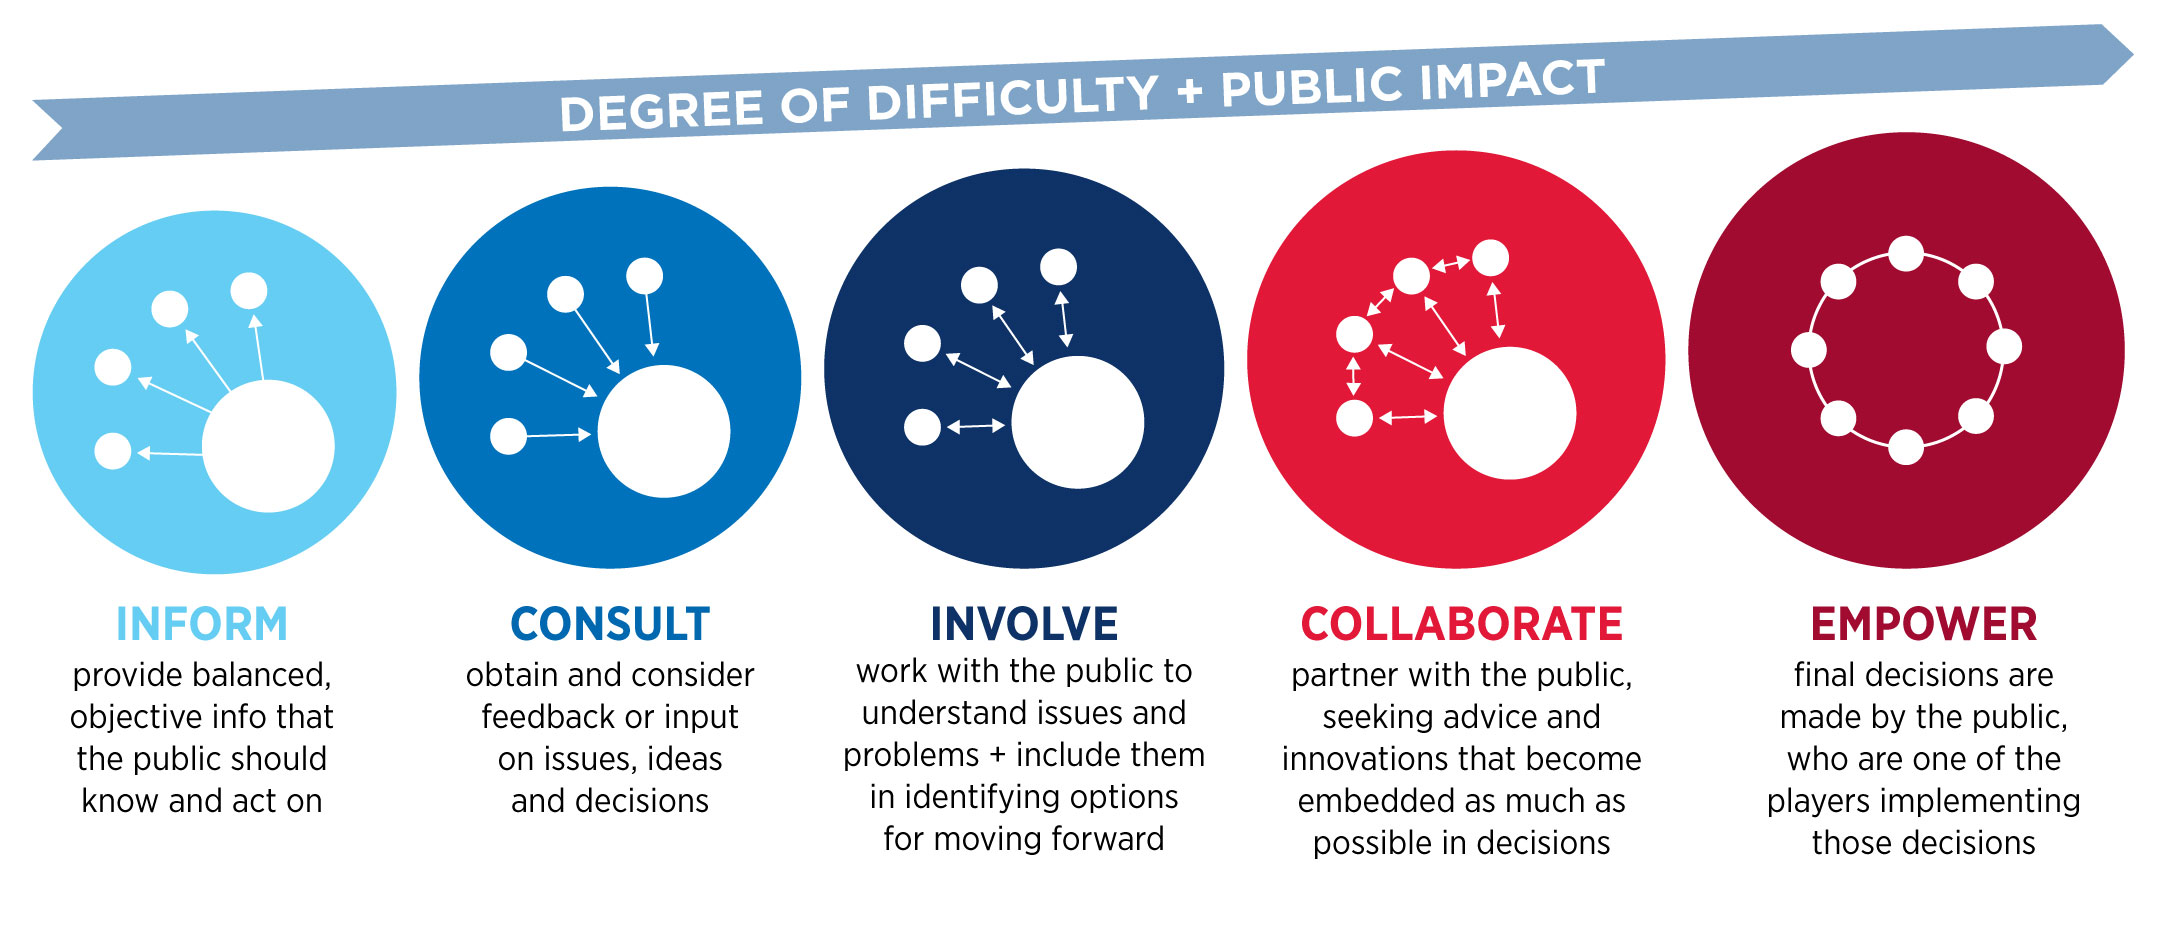 Infographic showing the five stages along the public participation spectrum: inform, consult, involve, collaborate and empower.